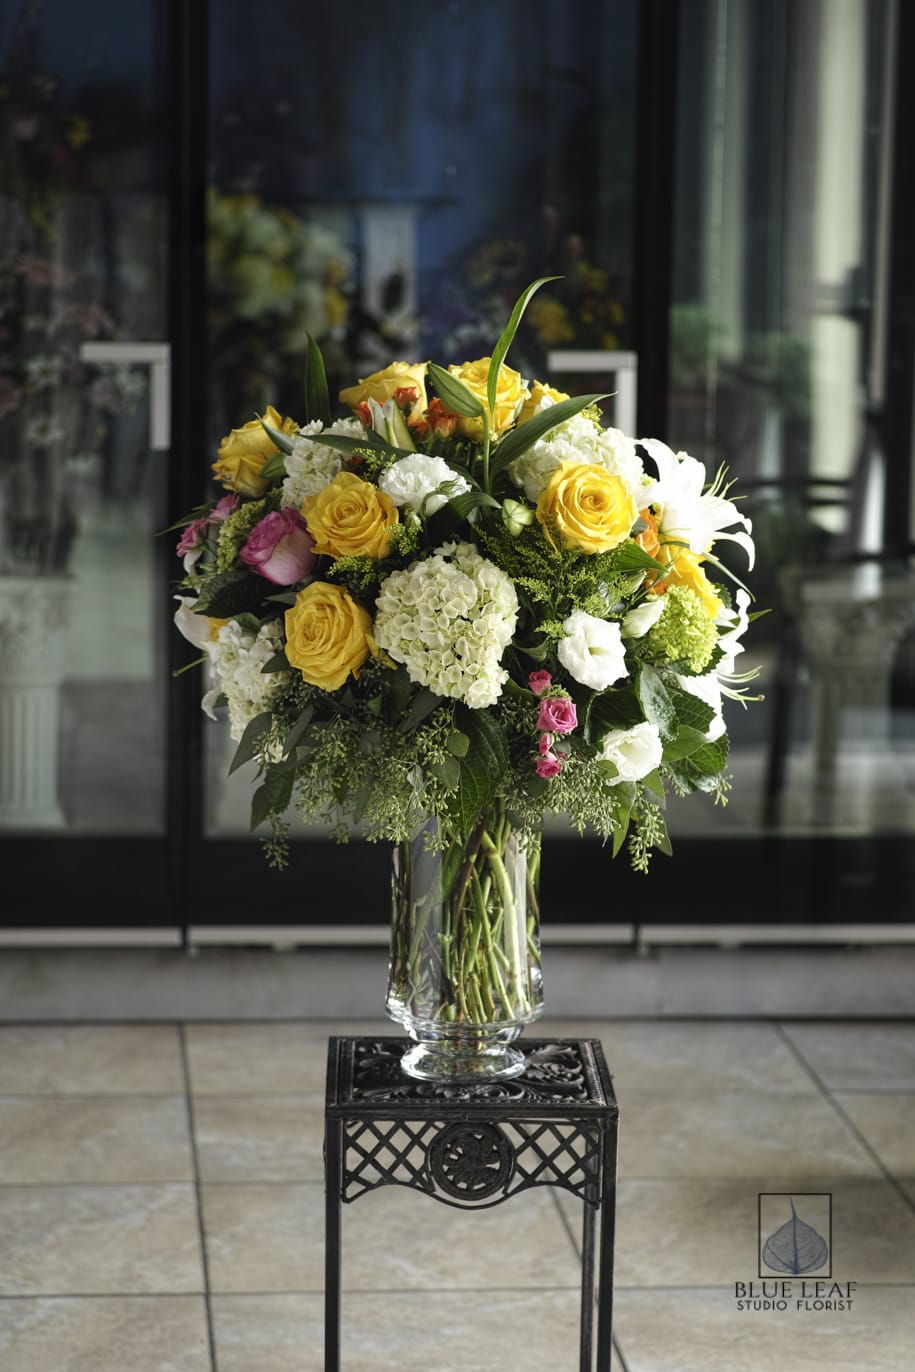 Paramount Garden Bright - Similar to our Paramount Garden bouquet, but brightened with yellow roses and vivid pinks. Flowers include fluffy white hydrangeas, roses, lilies and alstromeria in a large elegant vase. 